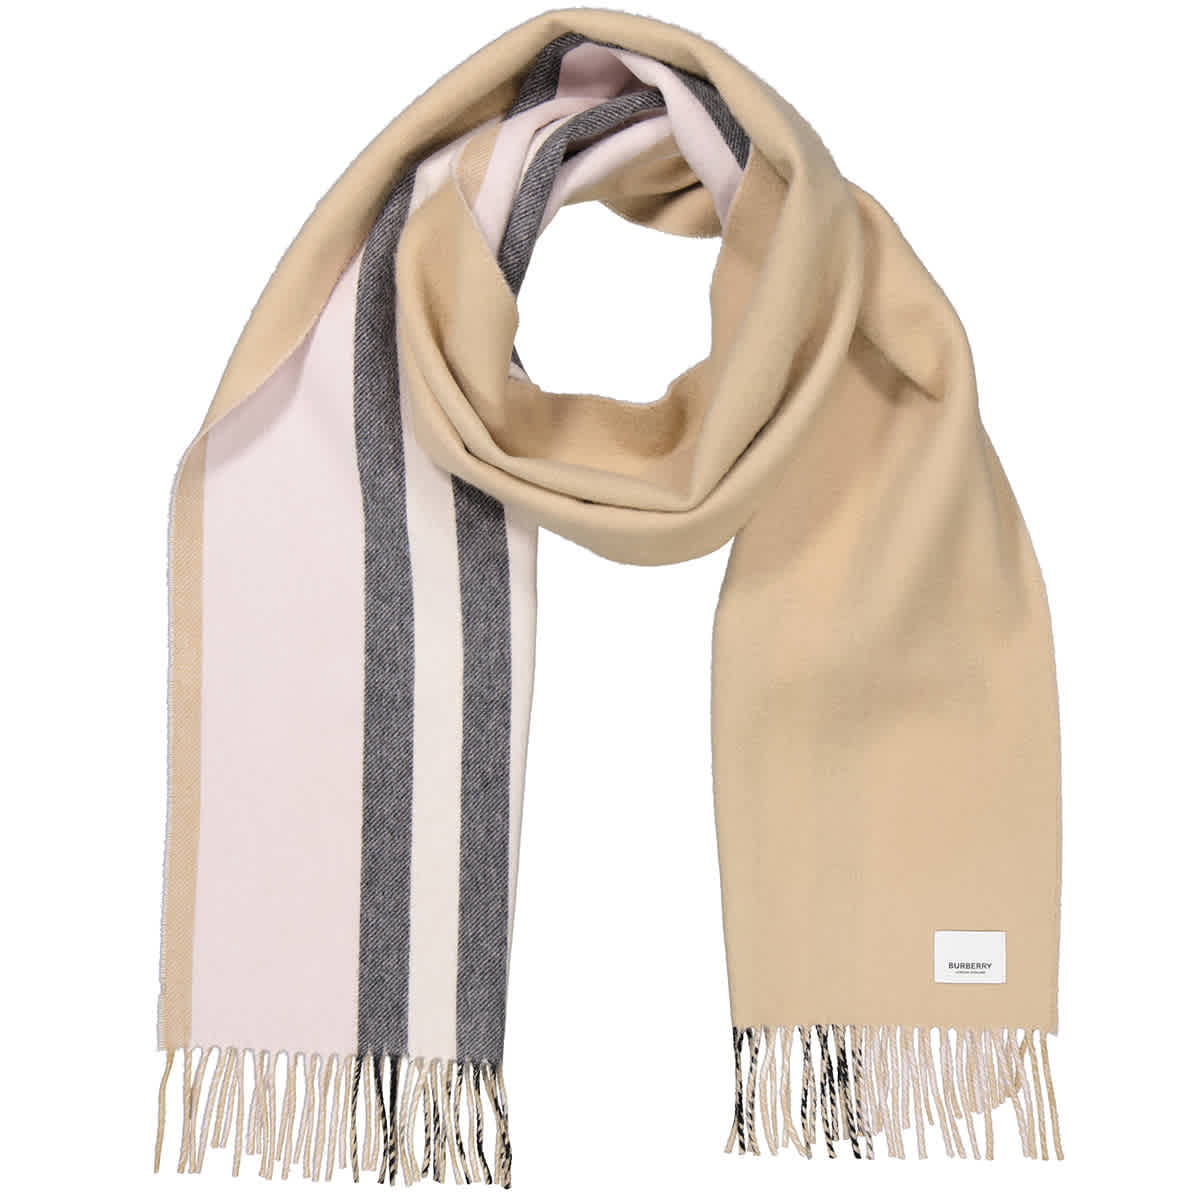 Womens Accessories Scarves and mufflers Burberry Reversible Cashmere Scarf in Beige Natural 